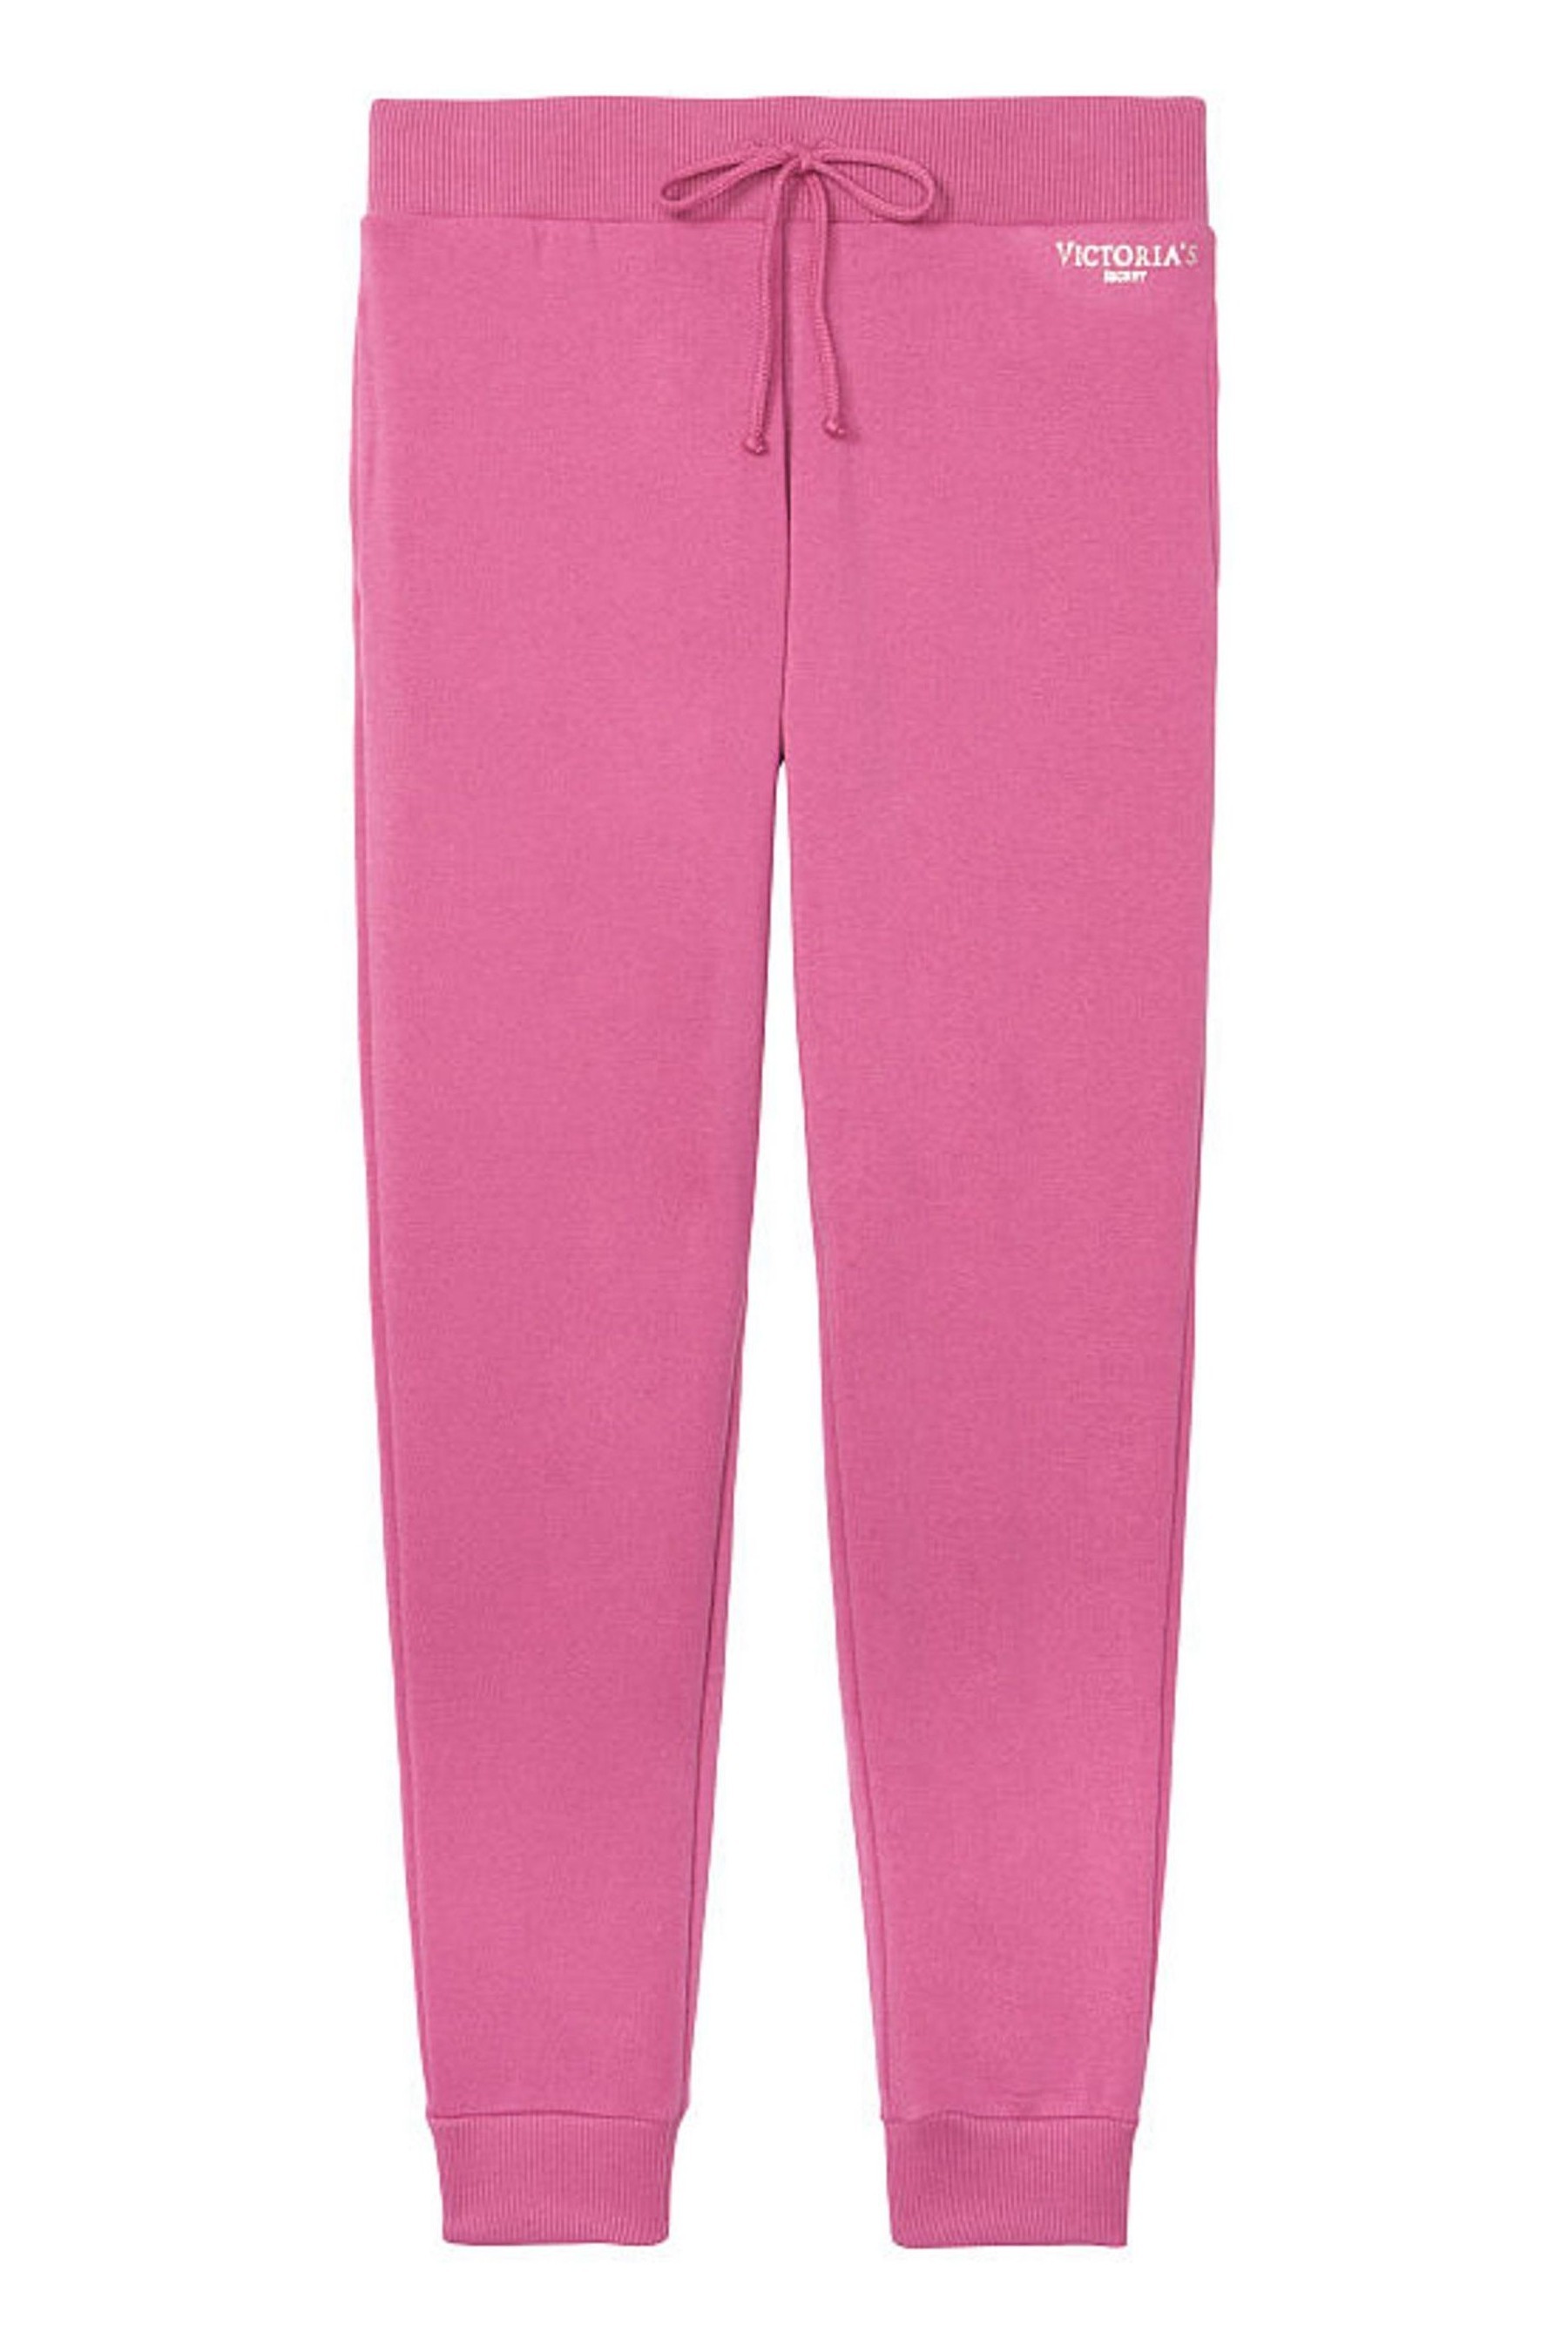 Buy Victoria's Secret Stretch Fleece Mid Rise Jogger from the Victoria ...